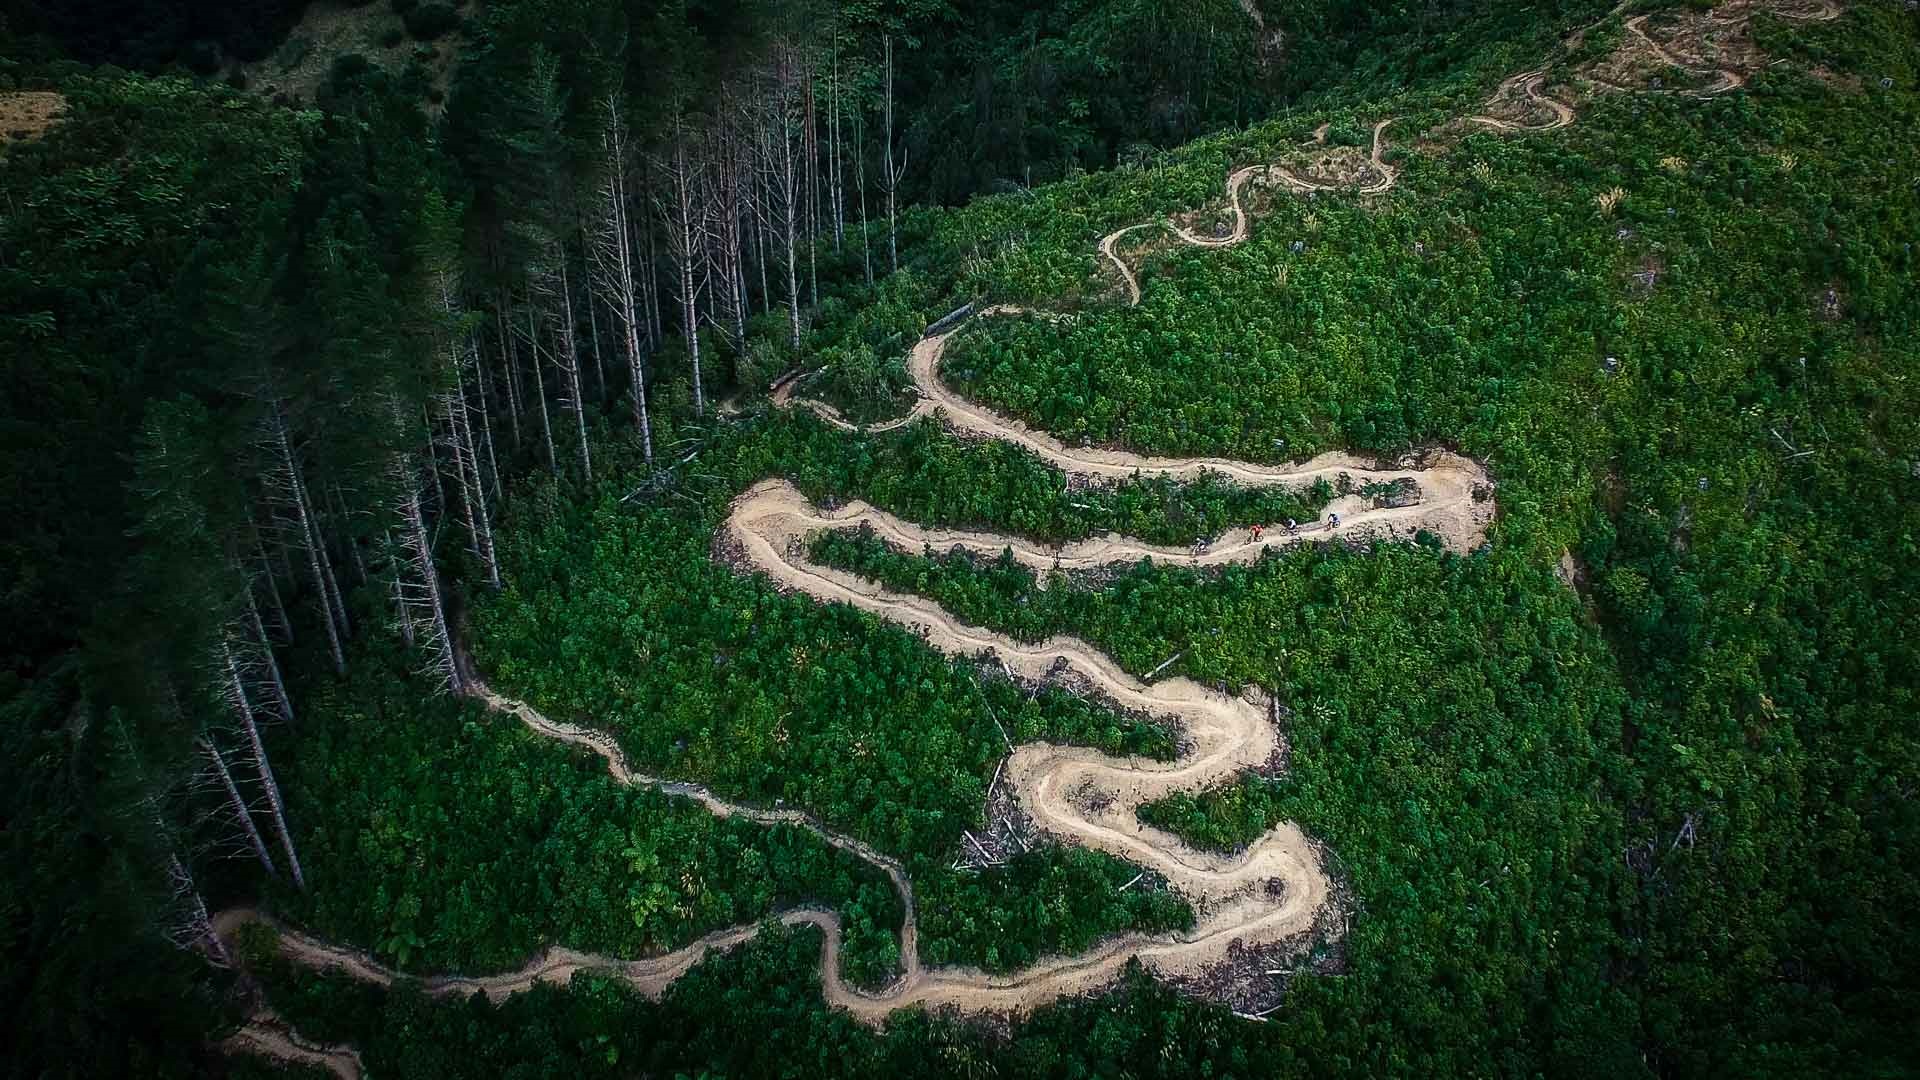 Photo shows aerial view of people mountain biking on a hill track snaking through a forest.